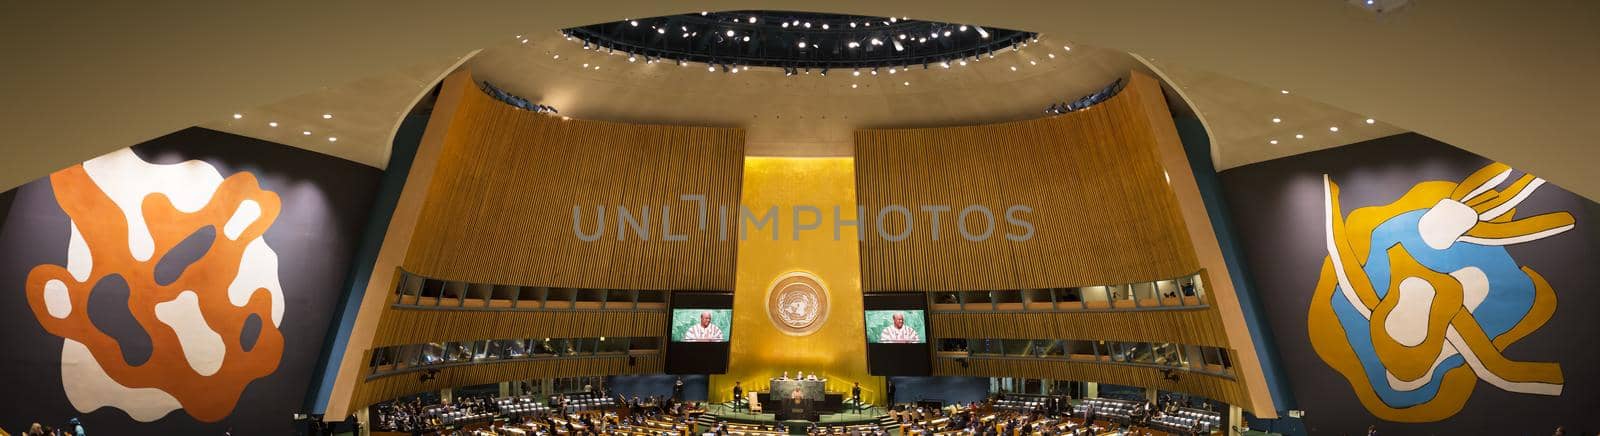 United Nations General Assembly in New York by palinchak